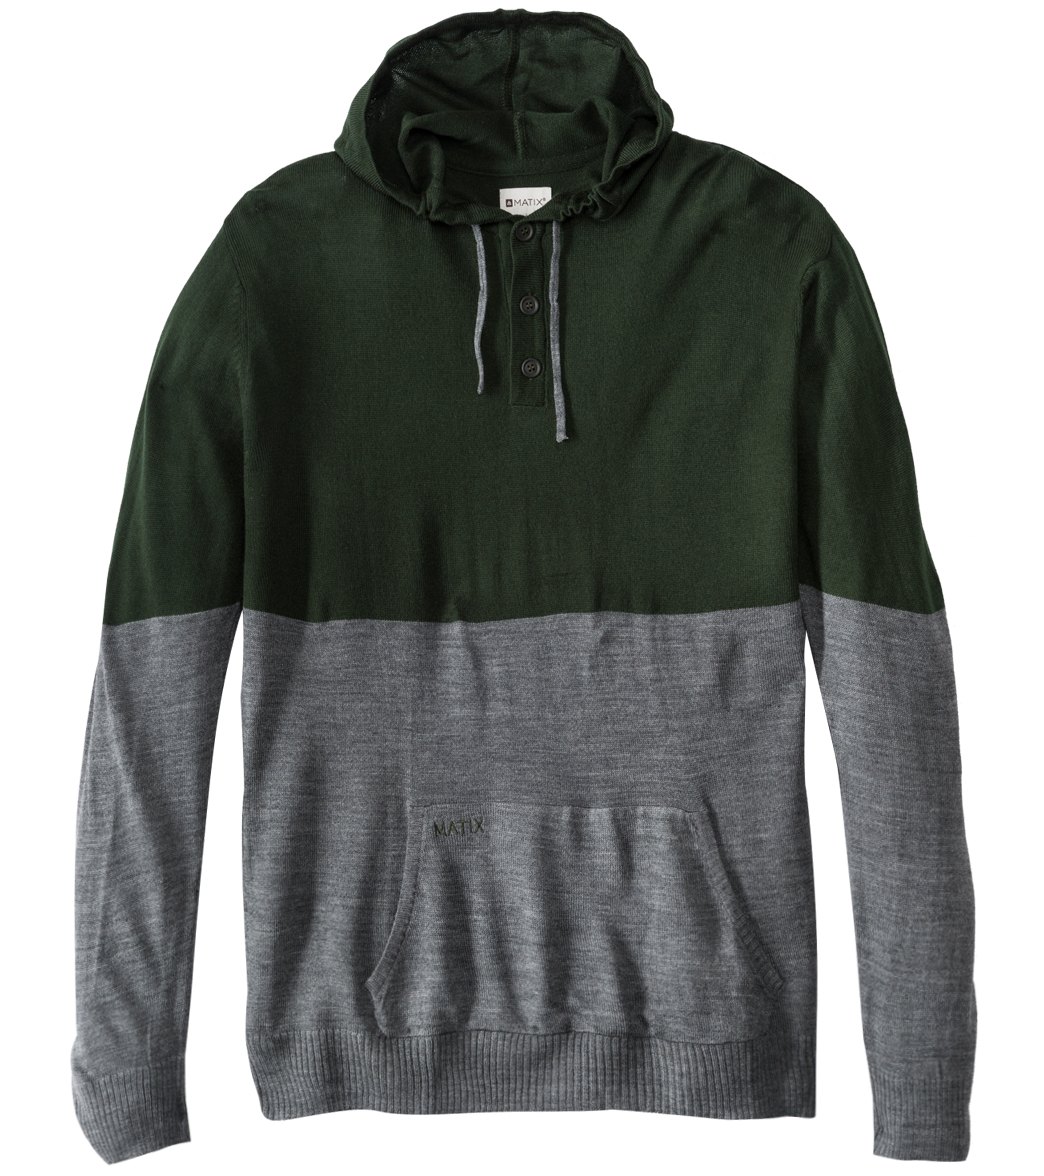 Matix Men's The Nordic Hood Pullover Hoodie at SwimOutlet.com - Free ...